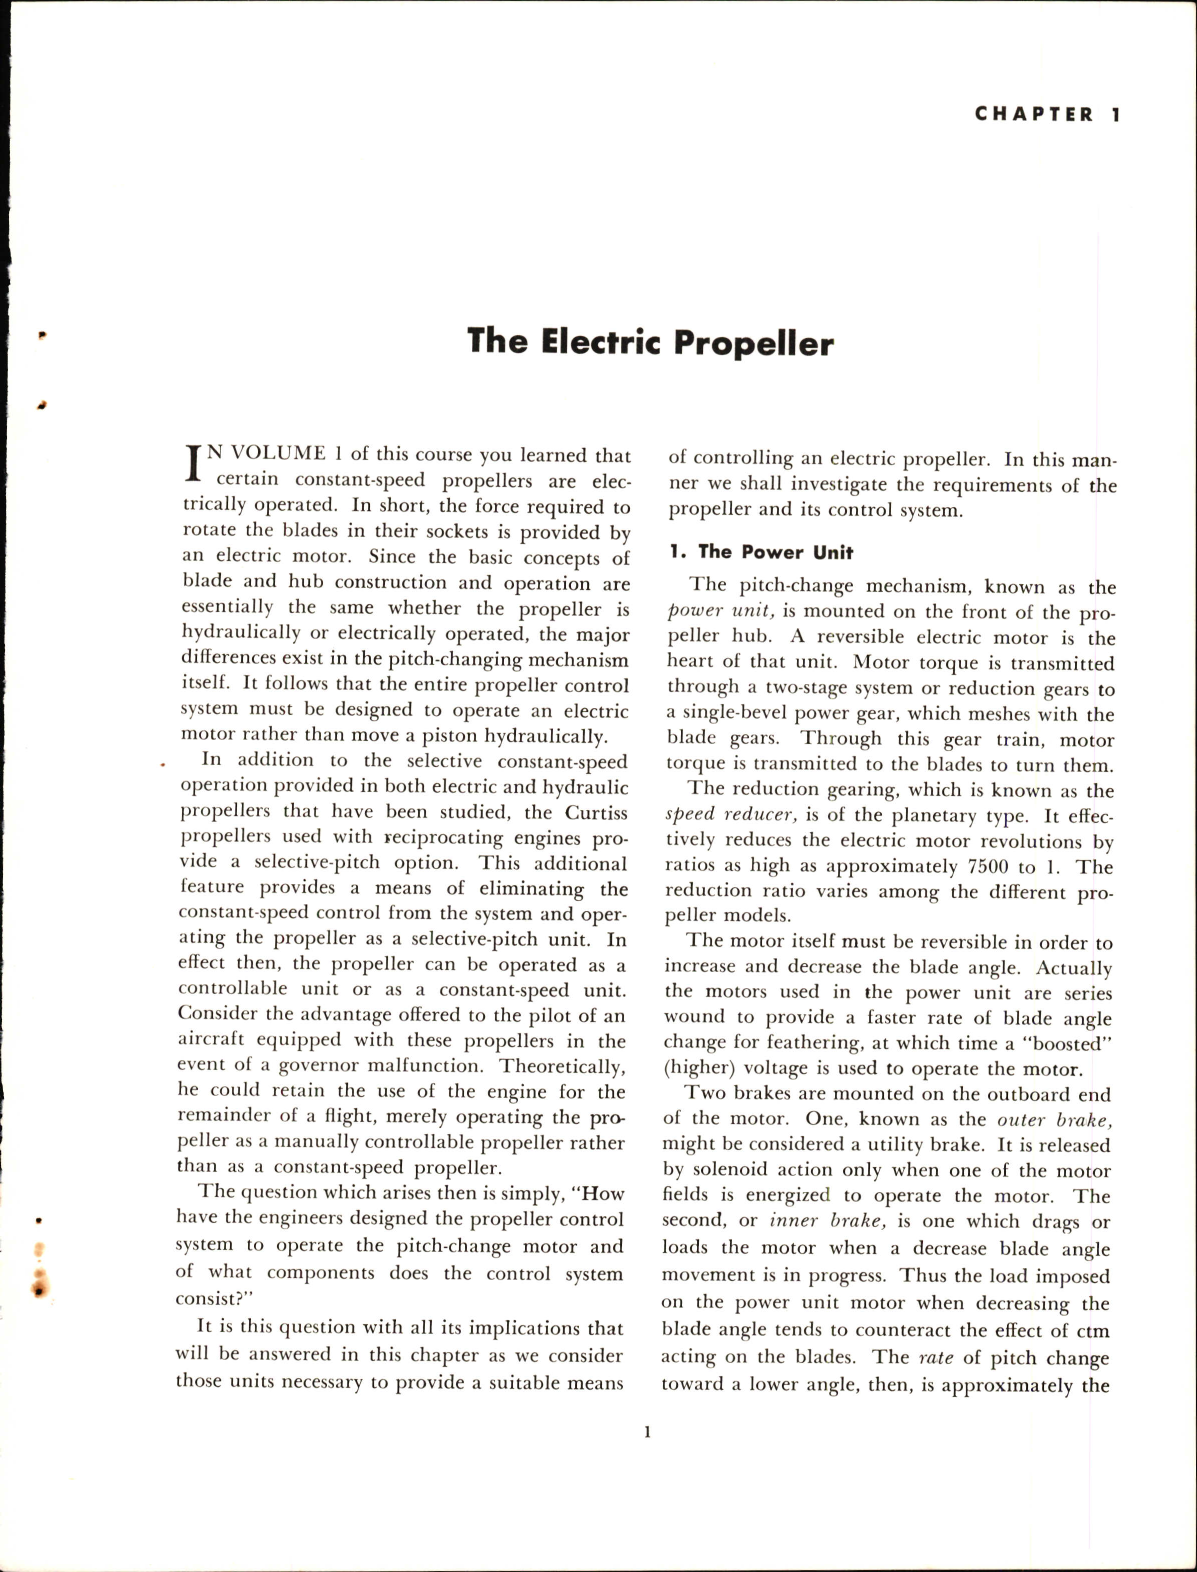 Sample page 7 from AirCorps Library document: Propeller Repairman, Curtiss Electric Propellers